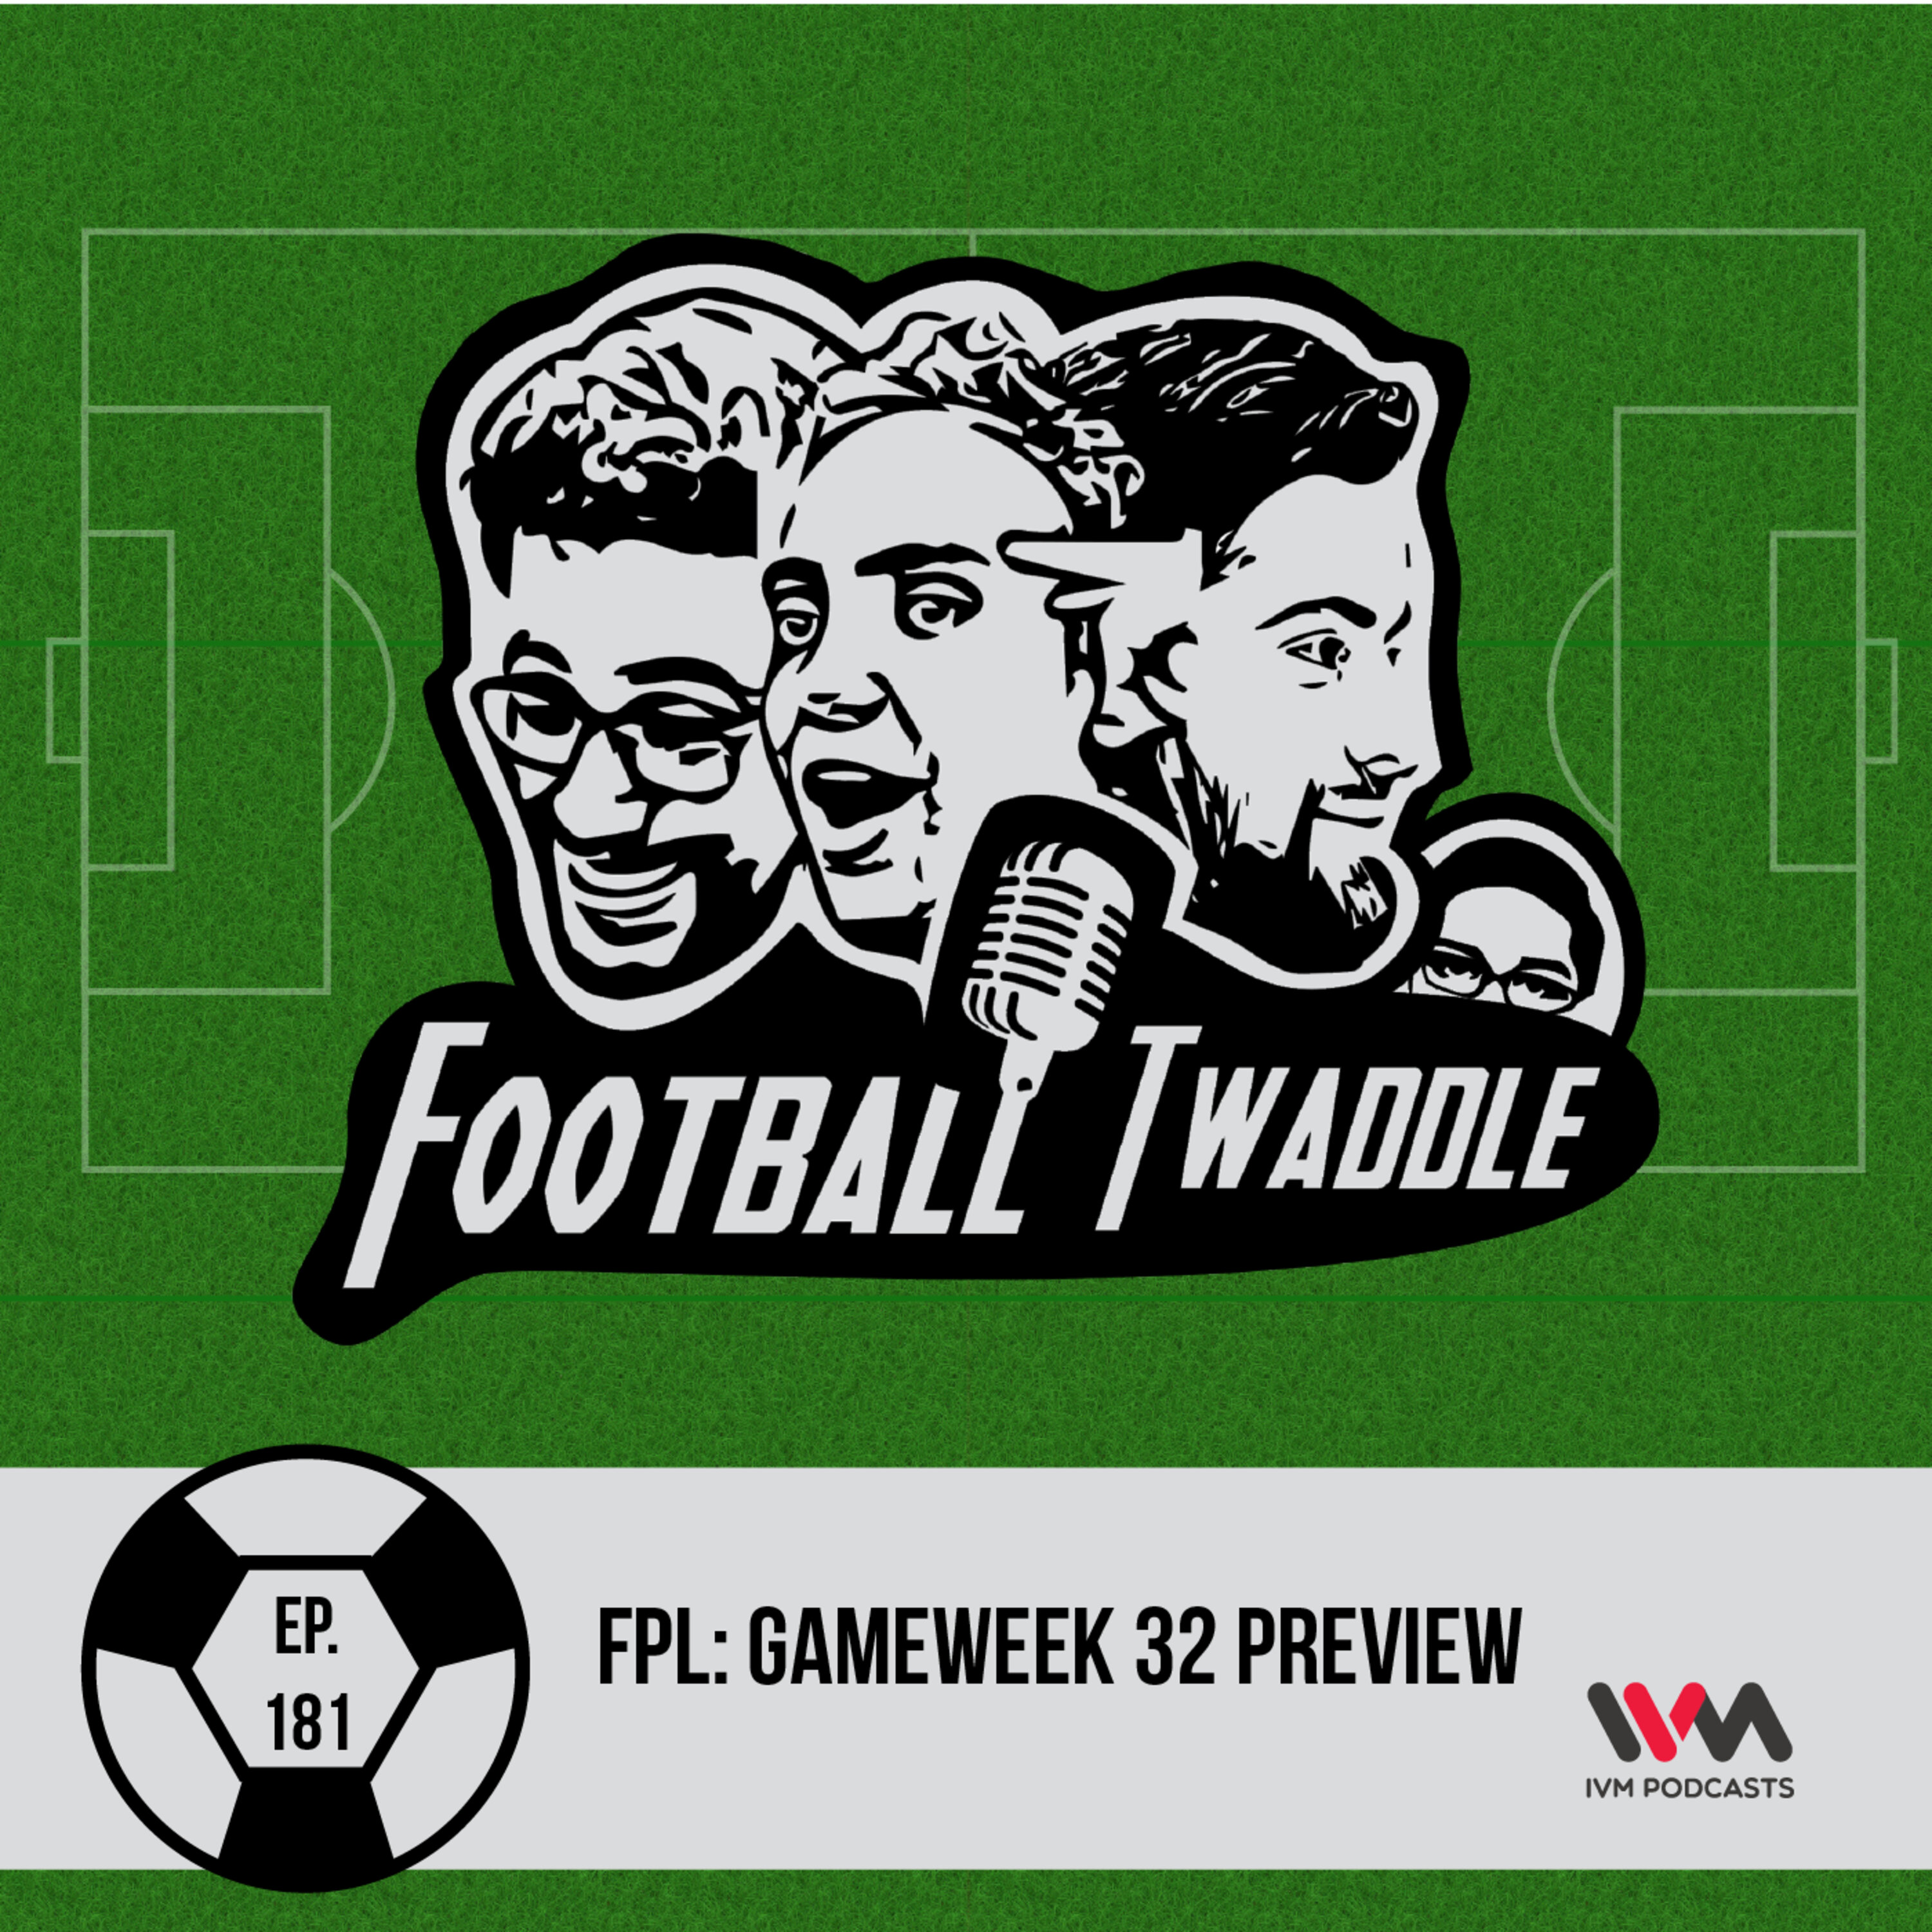 FPL: Gameweek 32 Preview